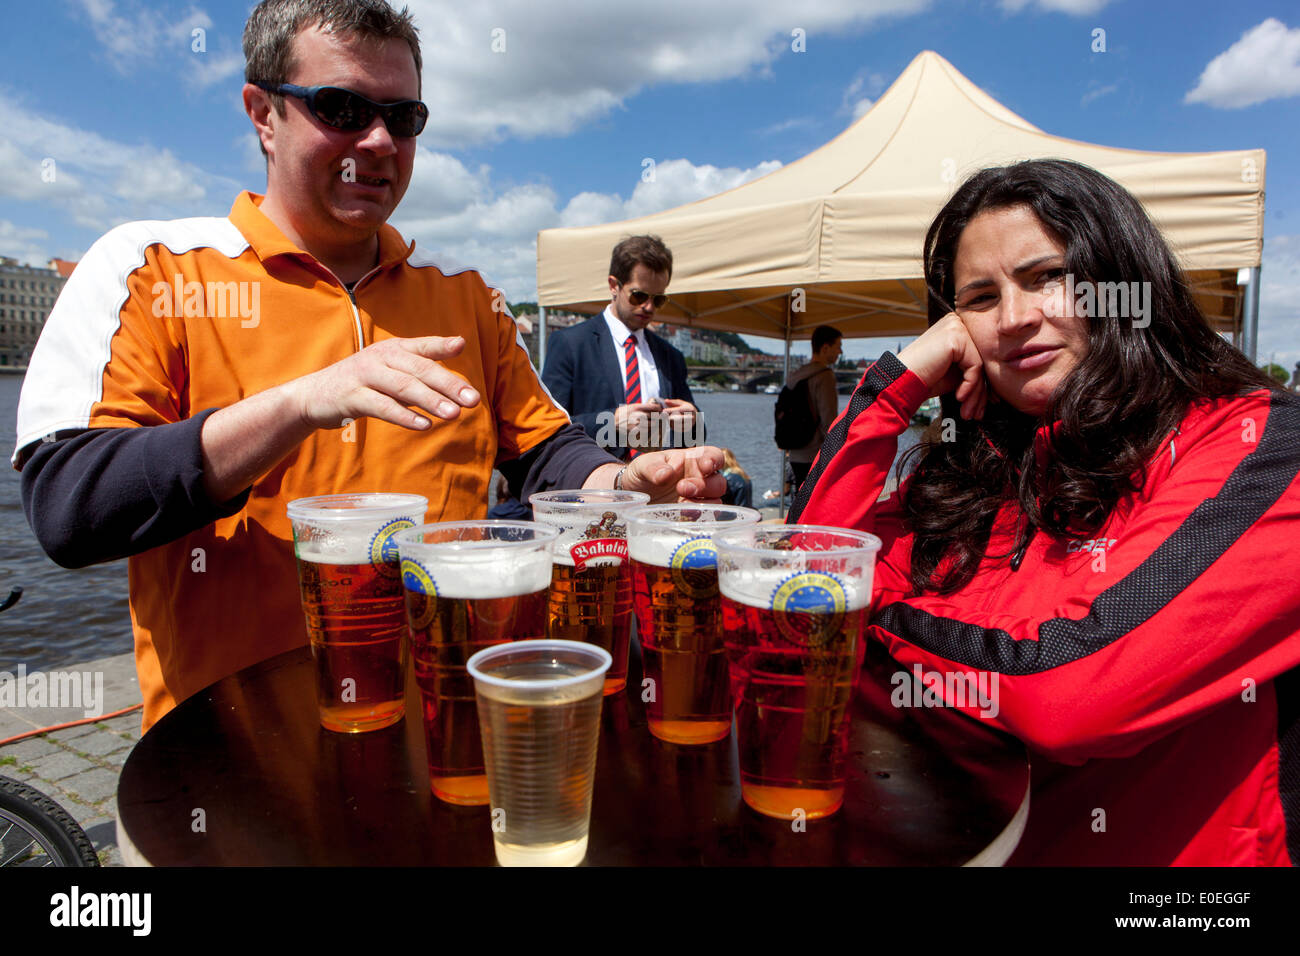 Tourists at the kiosk with beers in plastic cups, Prague Czech Republic Stock Photo